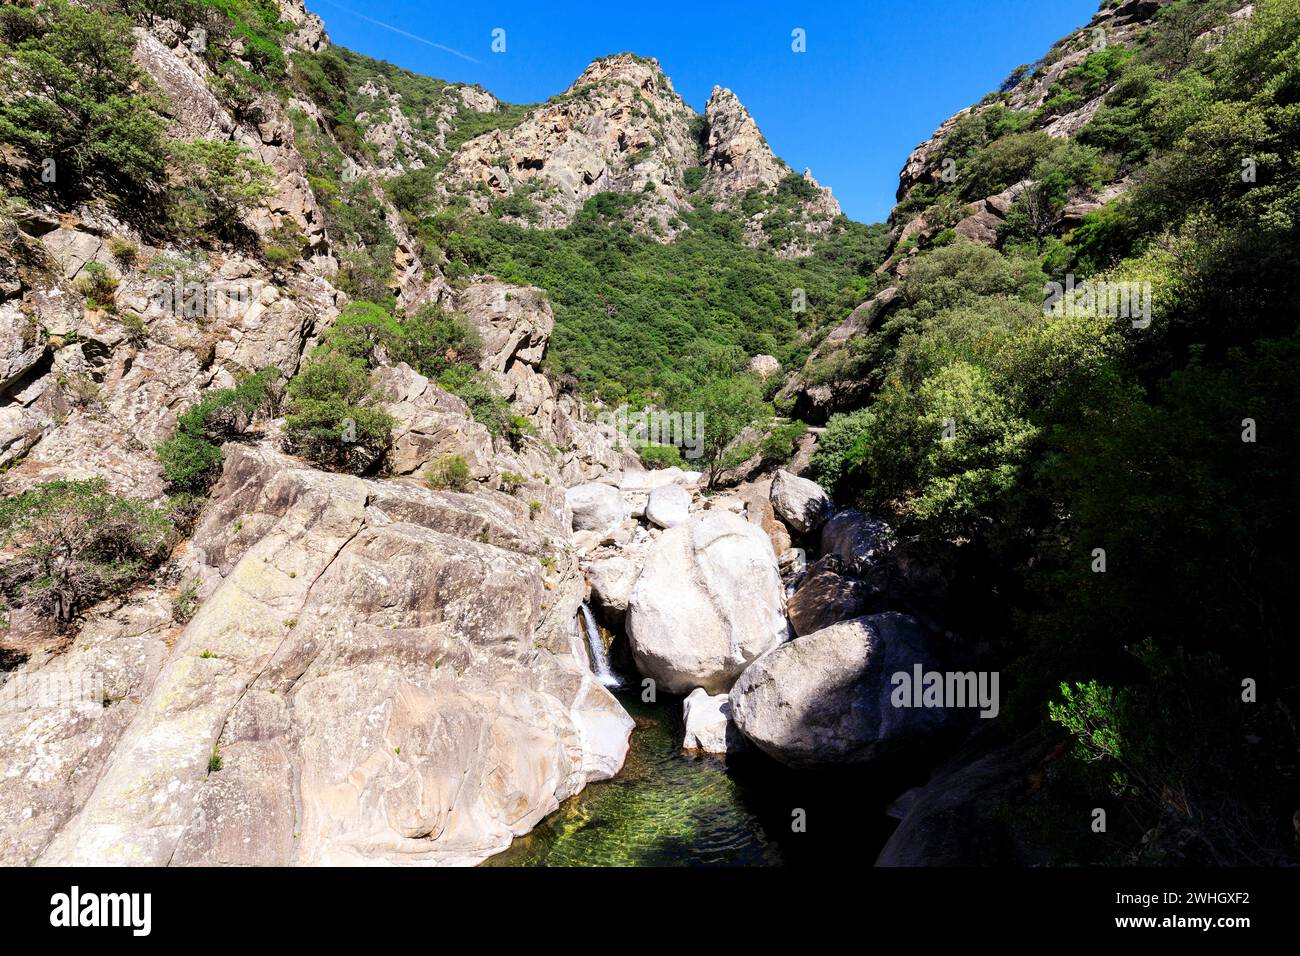 Gorges d'Heric, France Stock Photo